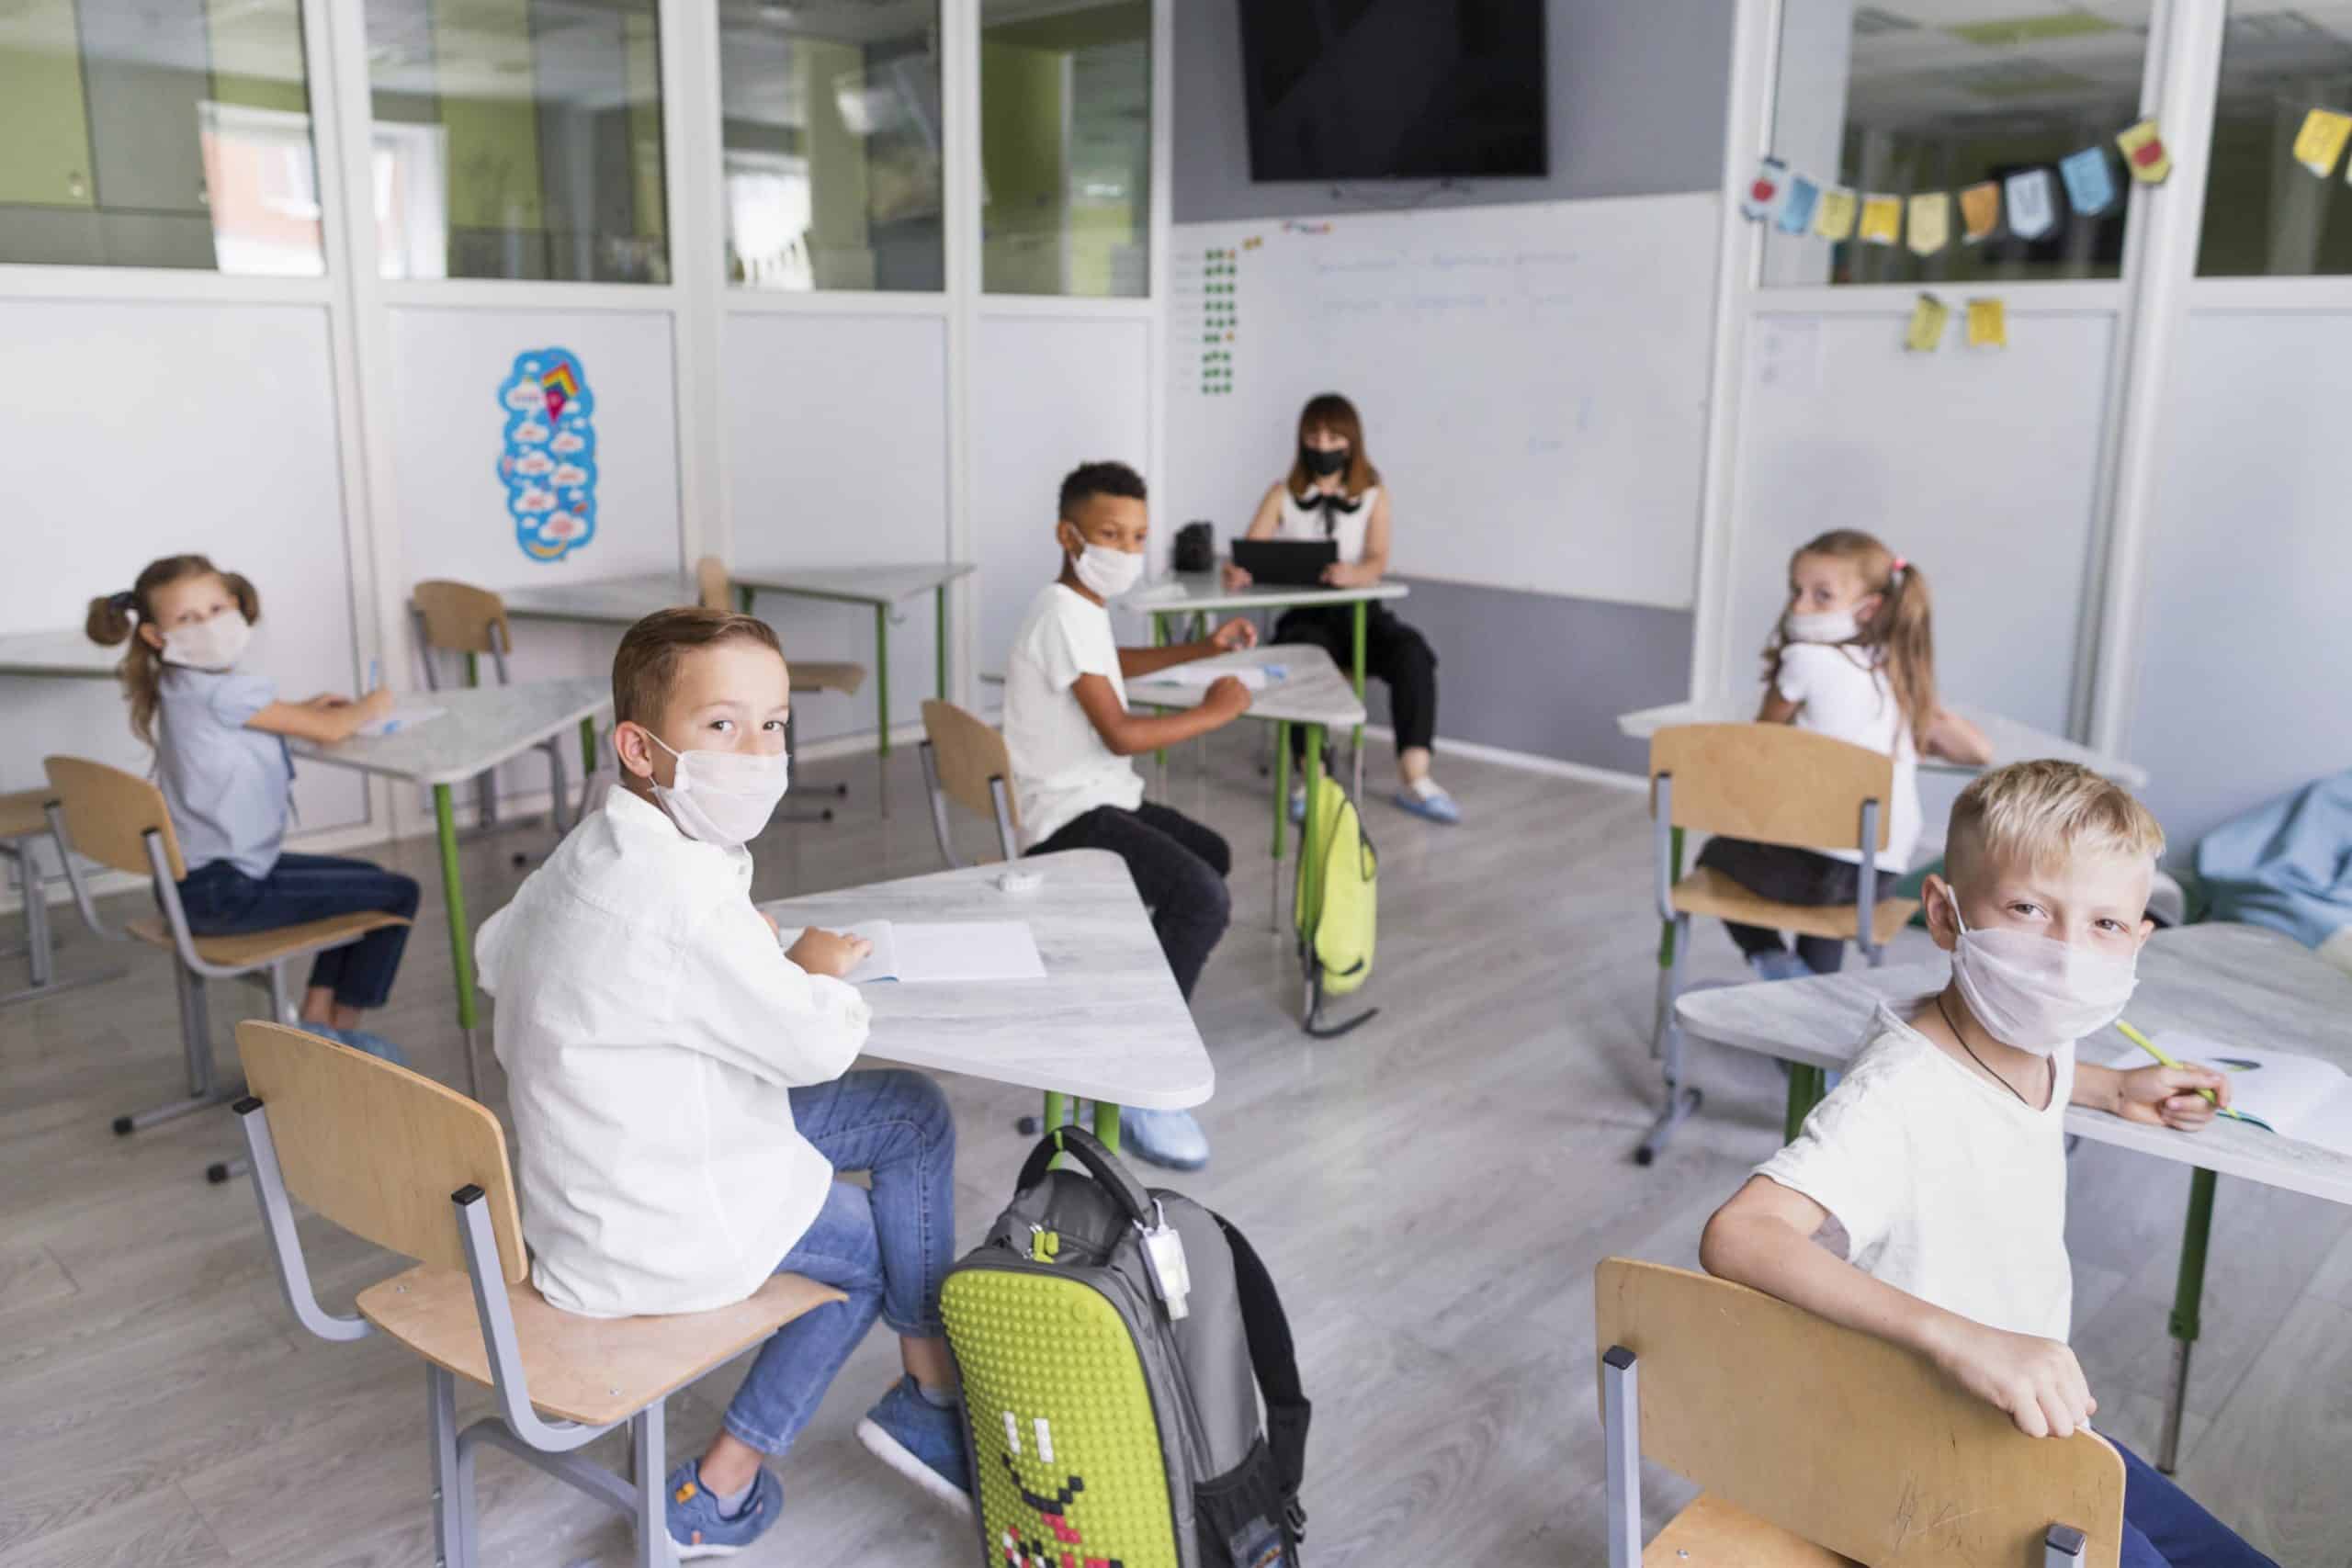 Students sitting in class room wearing safety face masks and social distancing